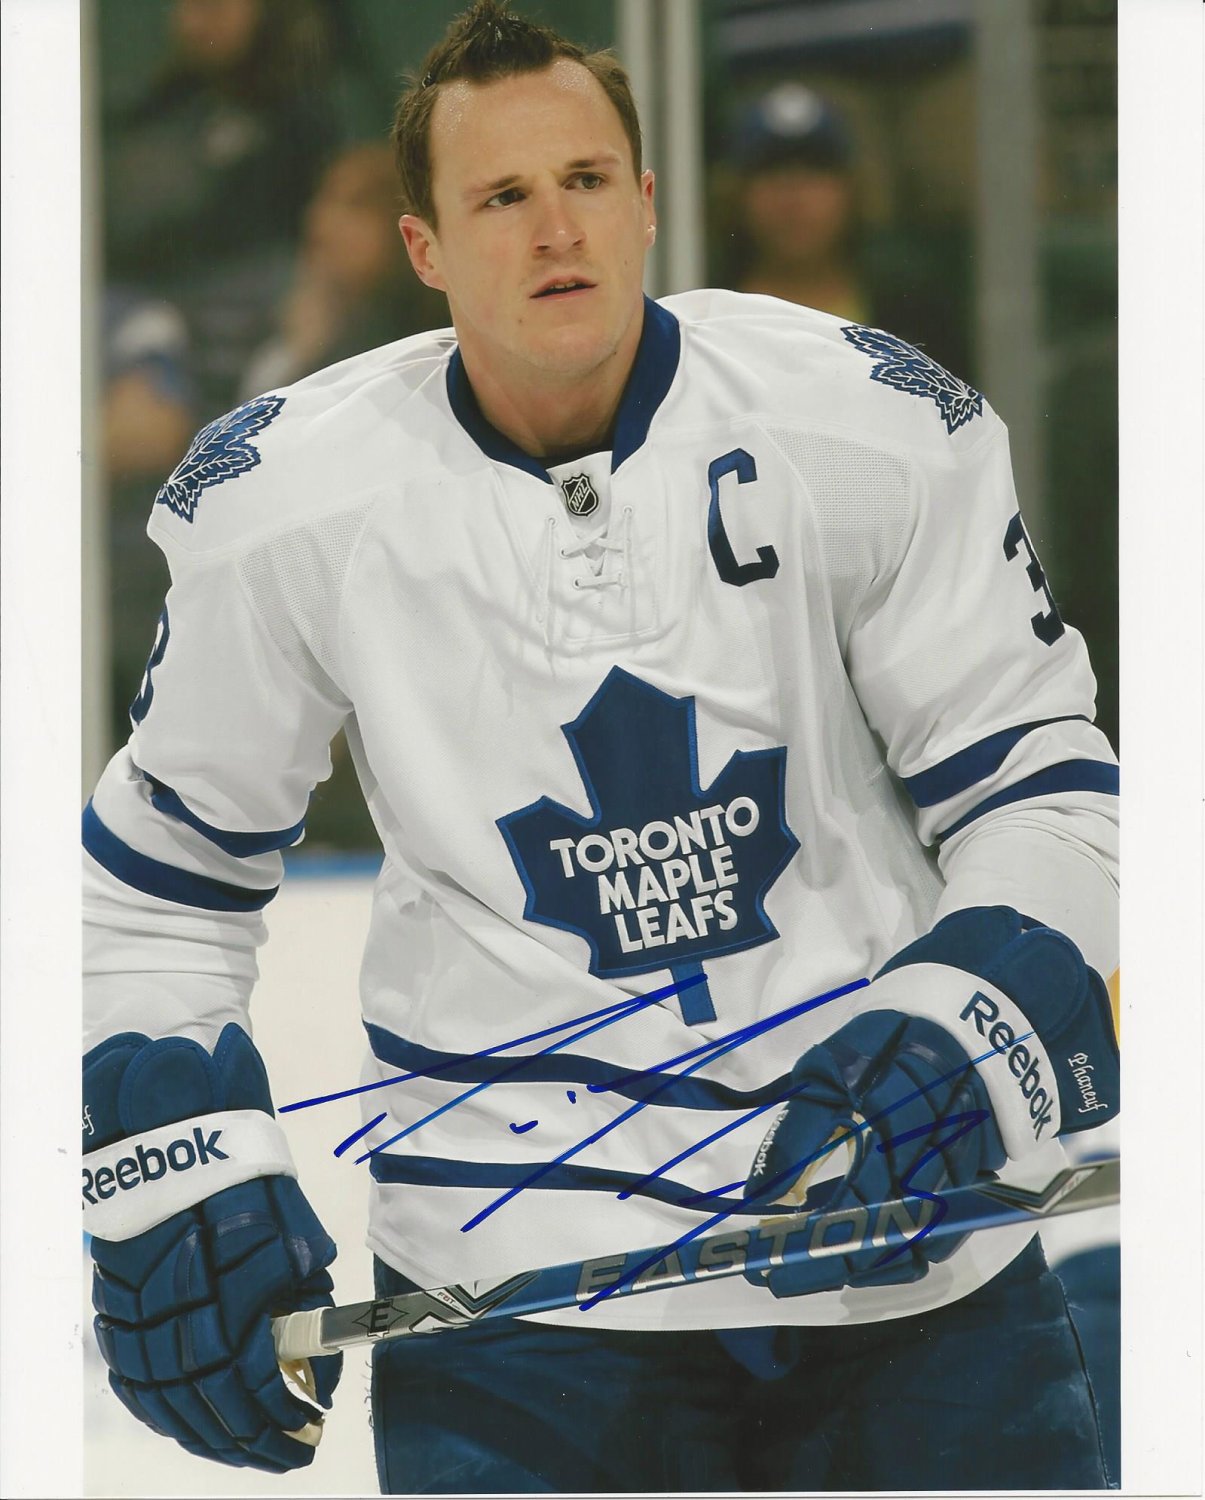 Dion Phaneuf Autographed Memorabilia  Signed Photo, Jersey, Collectibles &  Merchandise